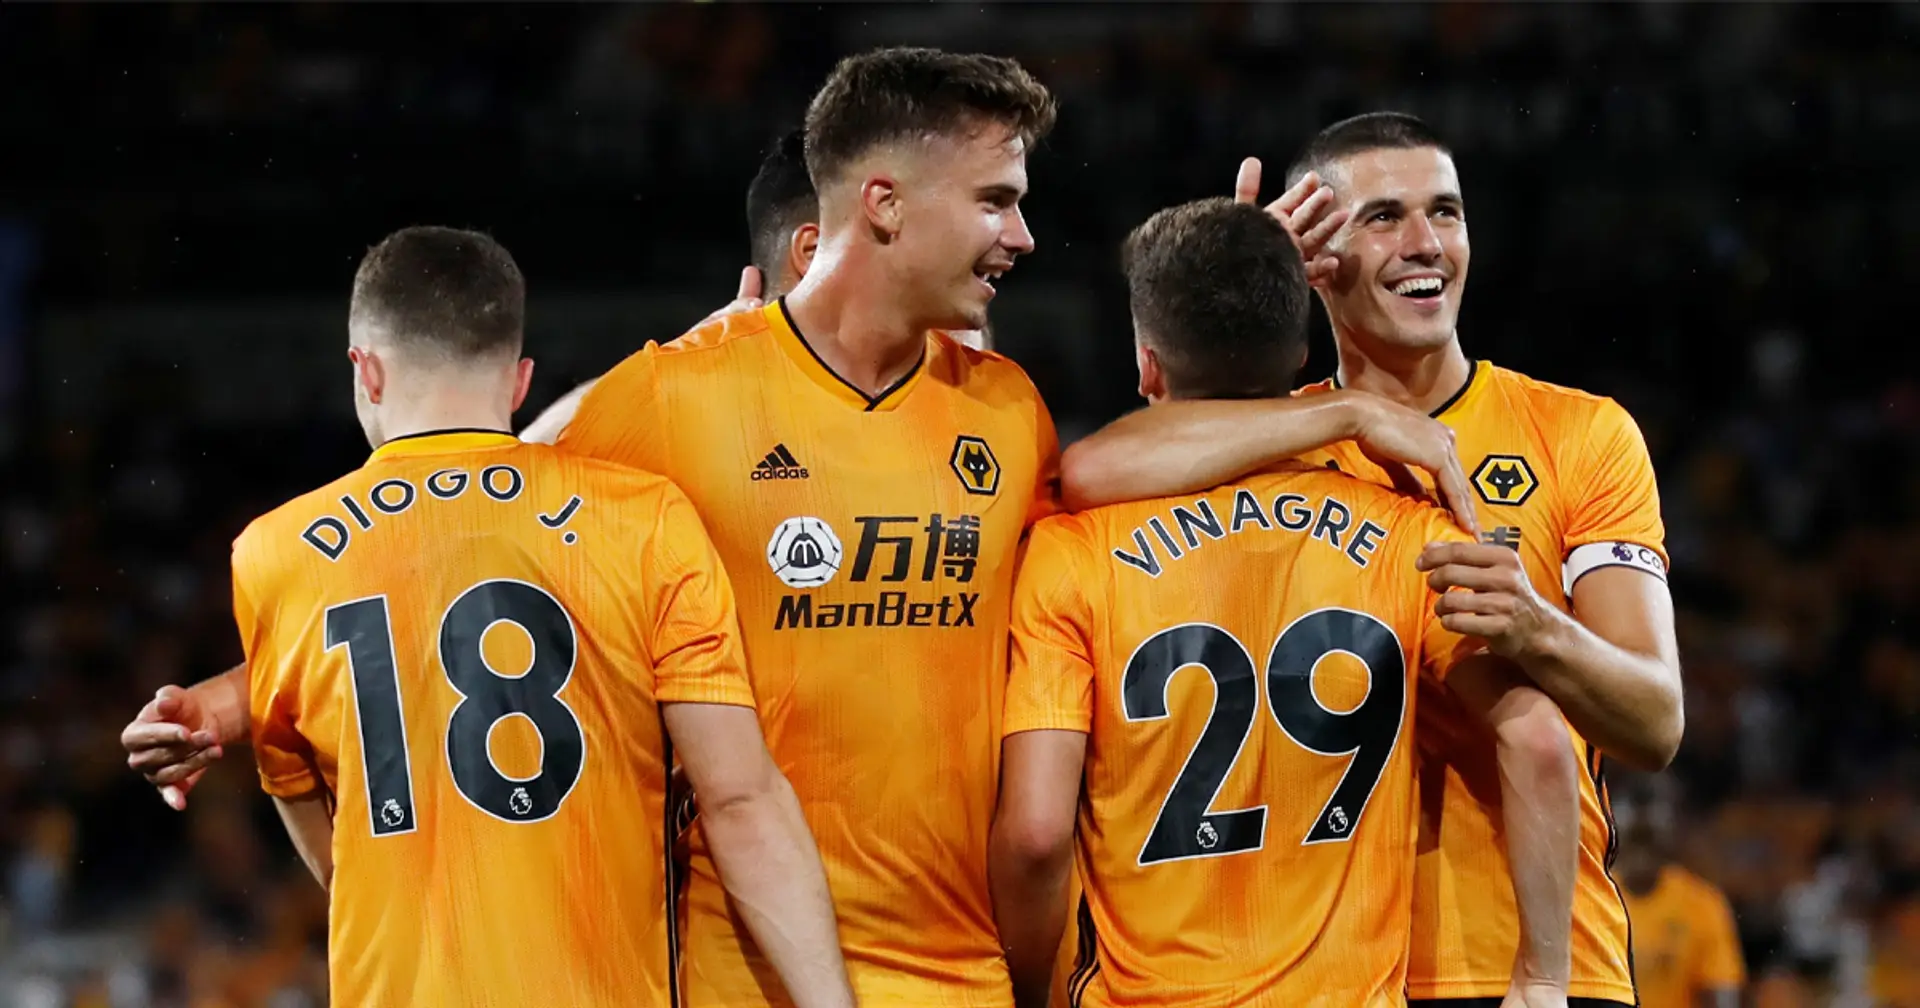 One year ago today, Wolves started their 2019/20 season - it's still far from over